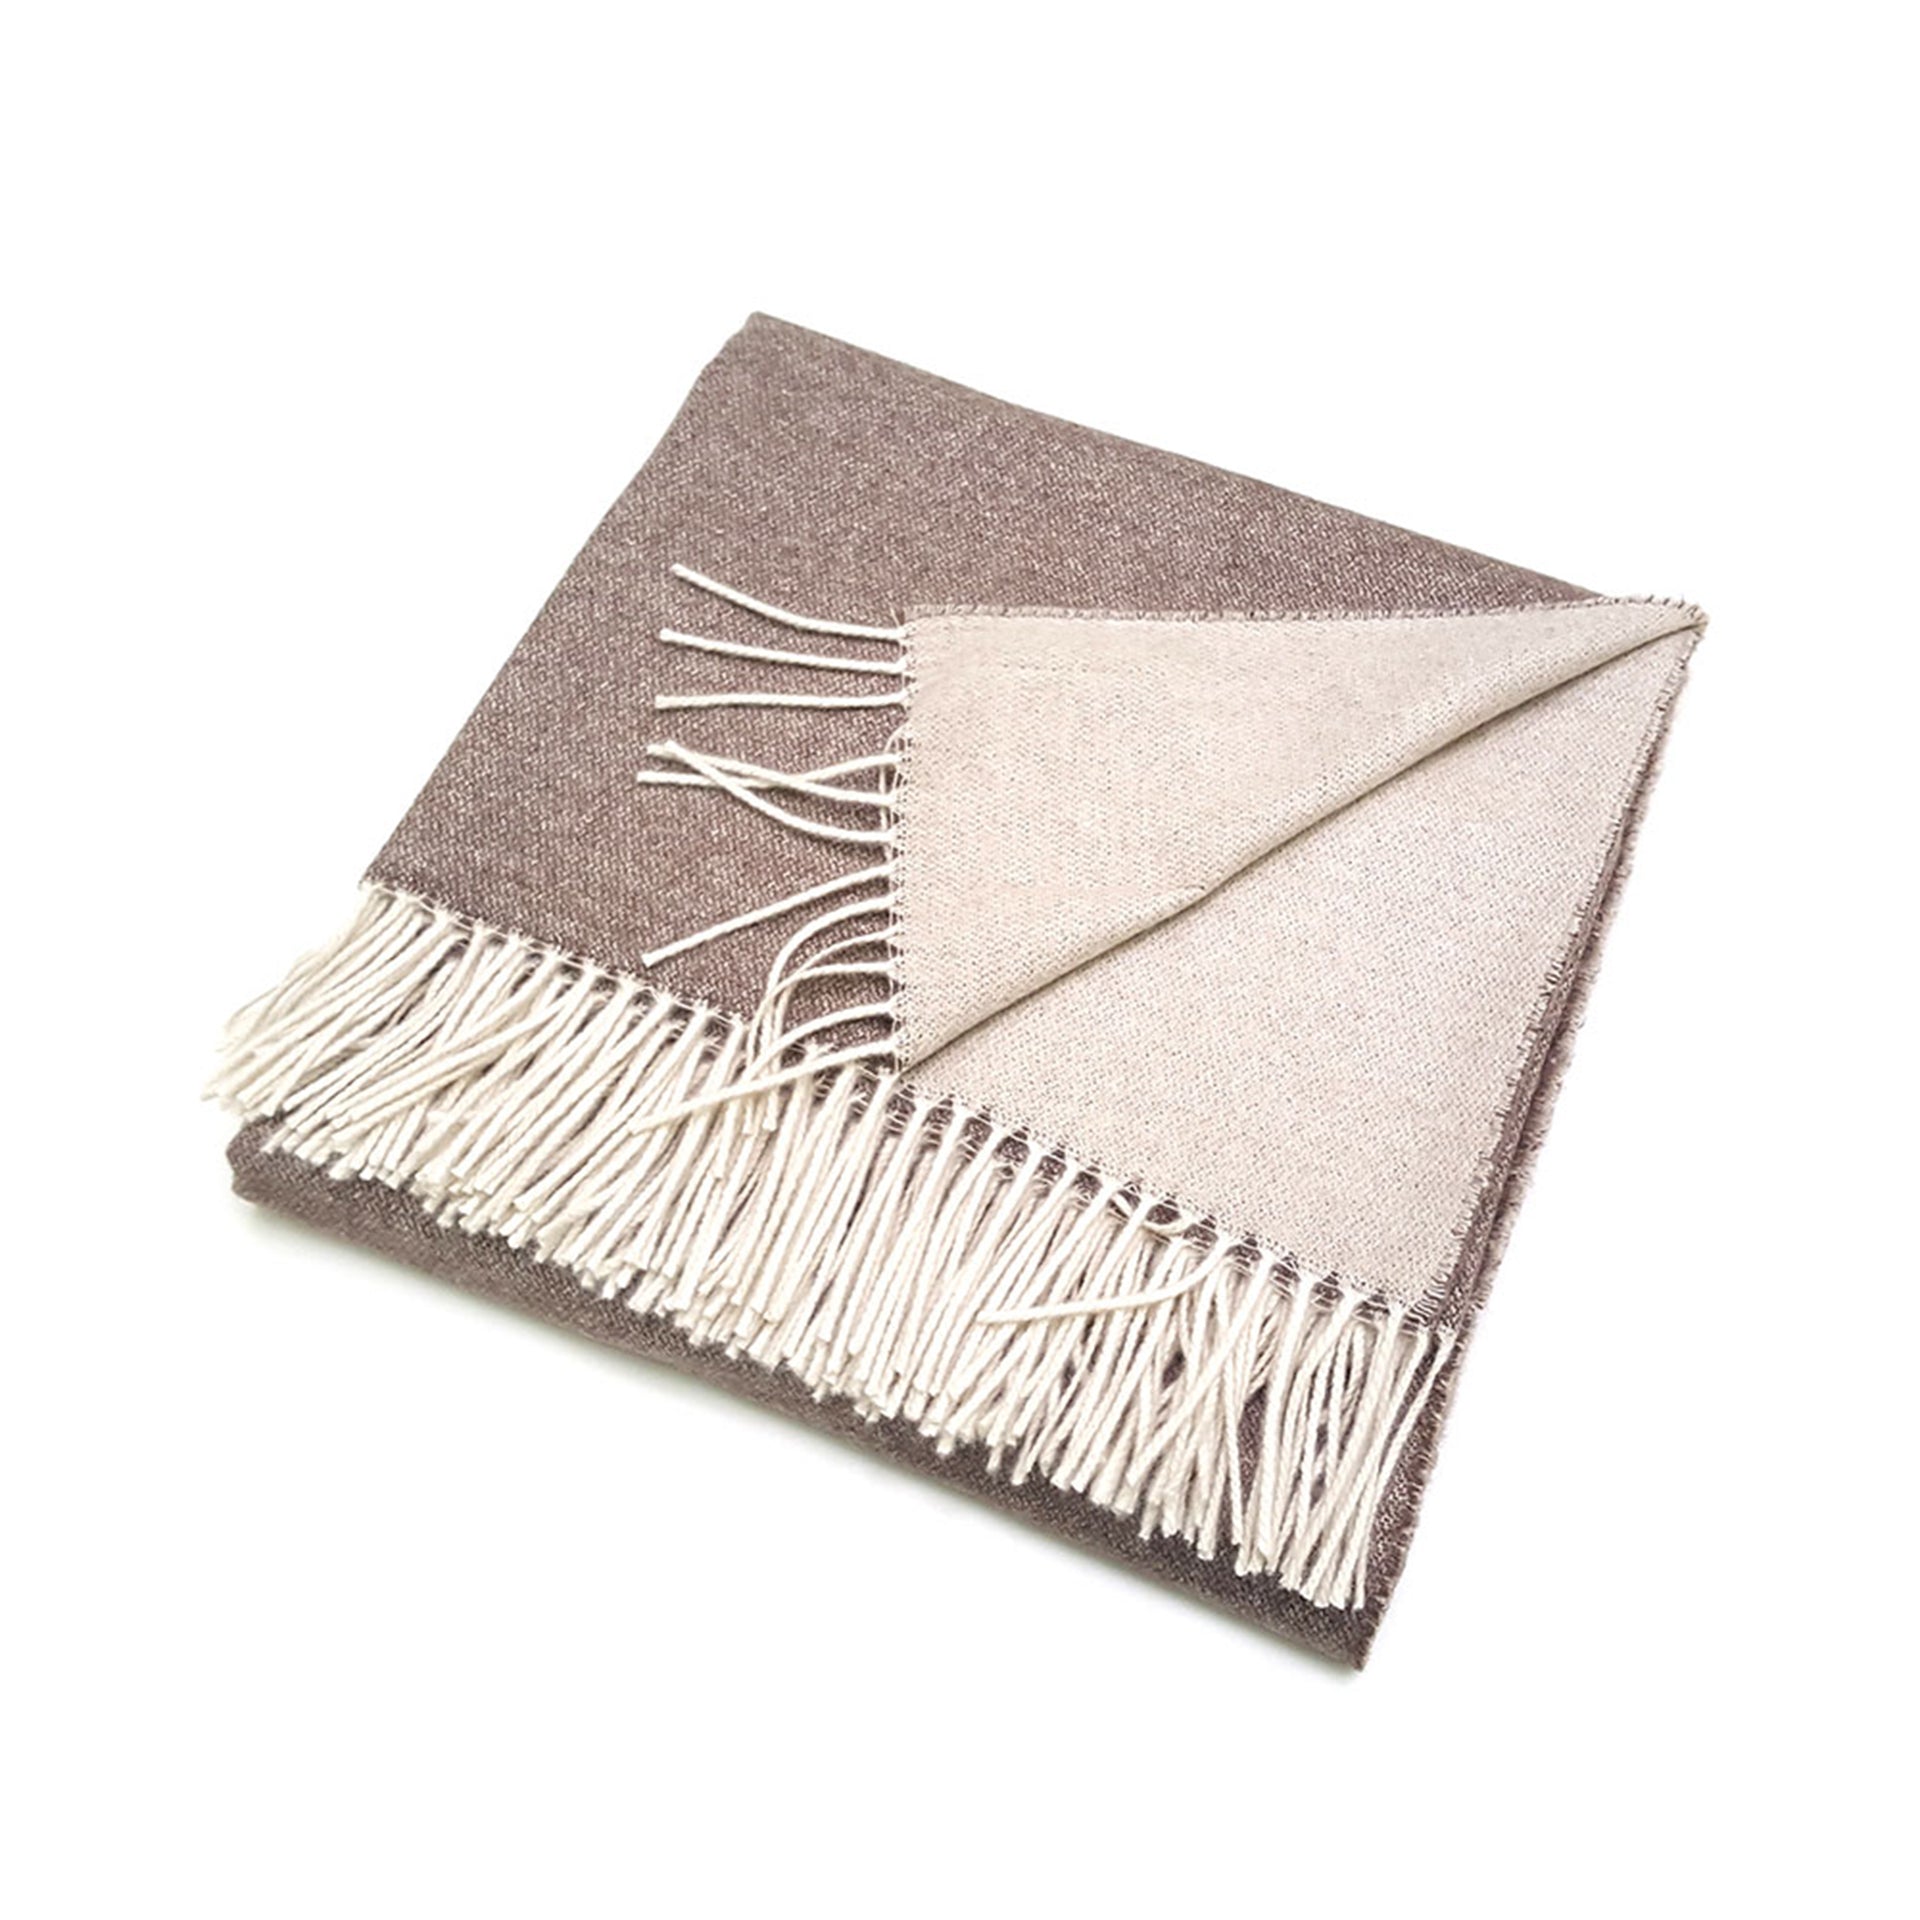 scandia home deborah cashmere throw, reversible brown and beige with fringe finish, 